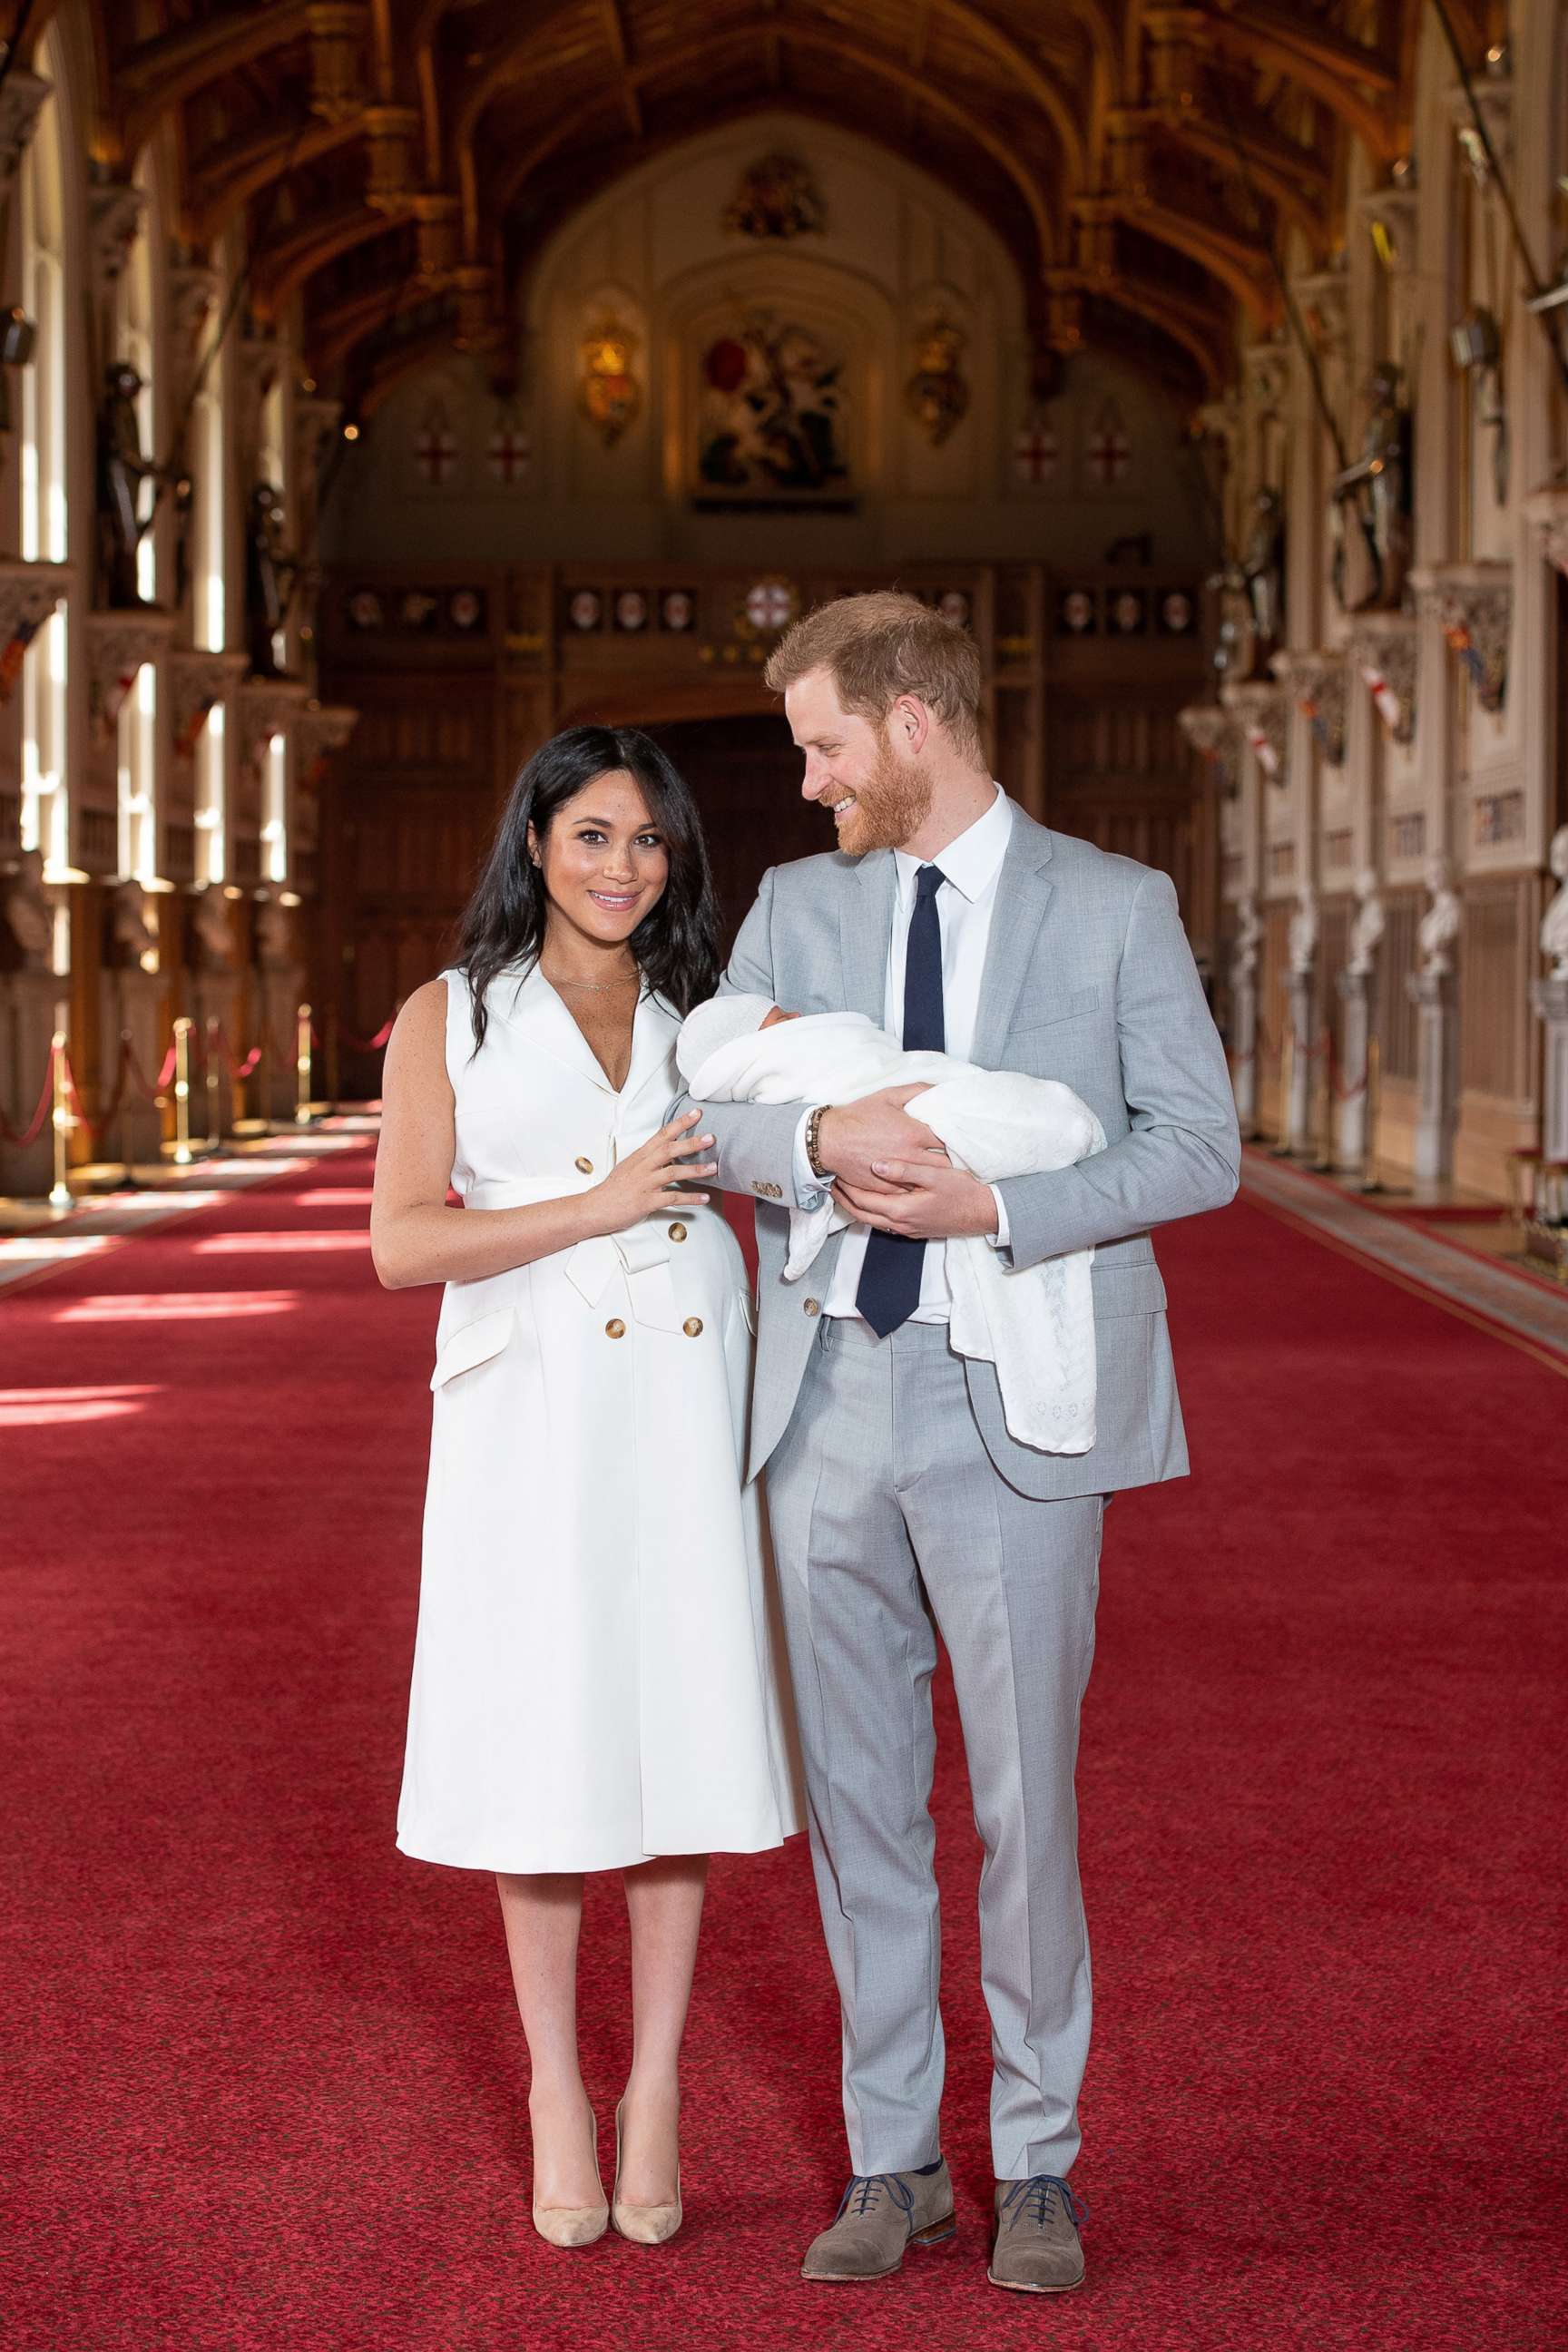 PHOTO: Britain's Prince Harry and Meghan, Duchess of Sussex, hold their newborn baby son in St George's Hall at Windsor Castle, in Windsor, England, May 8, 2019.